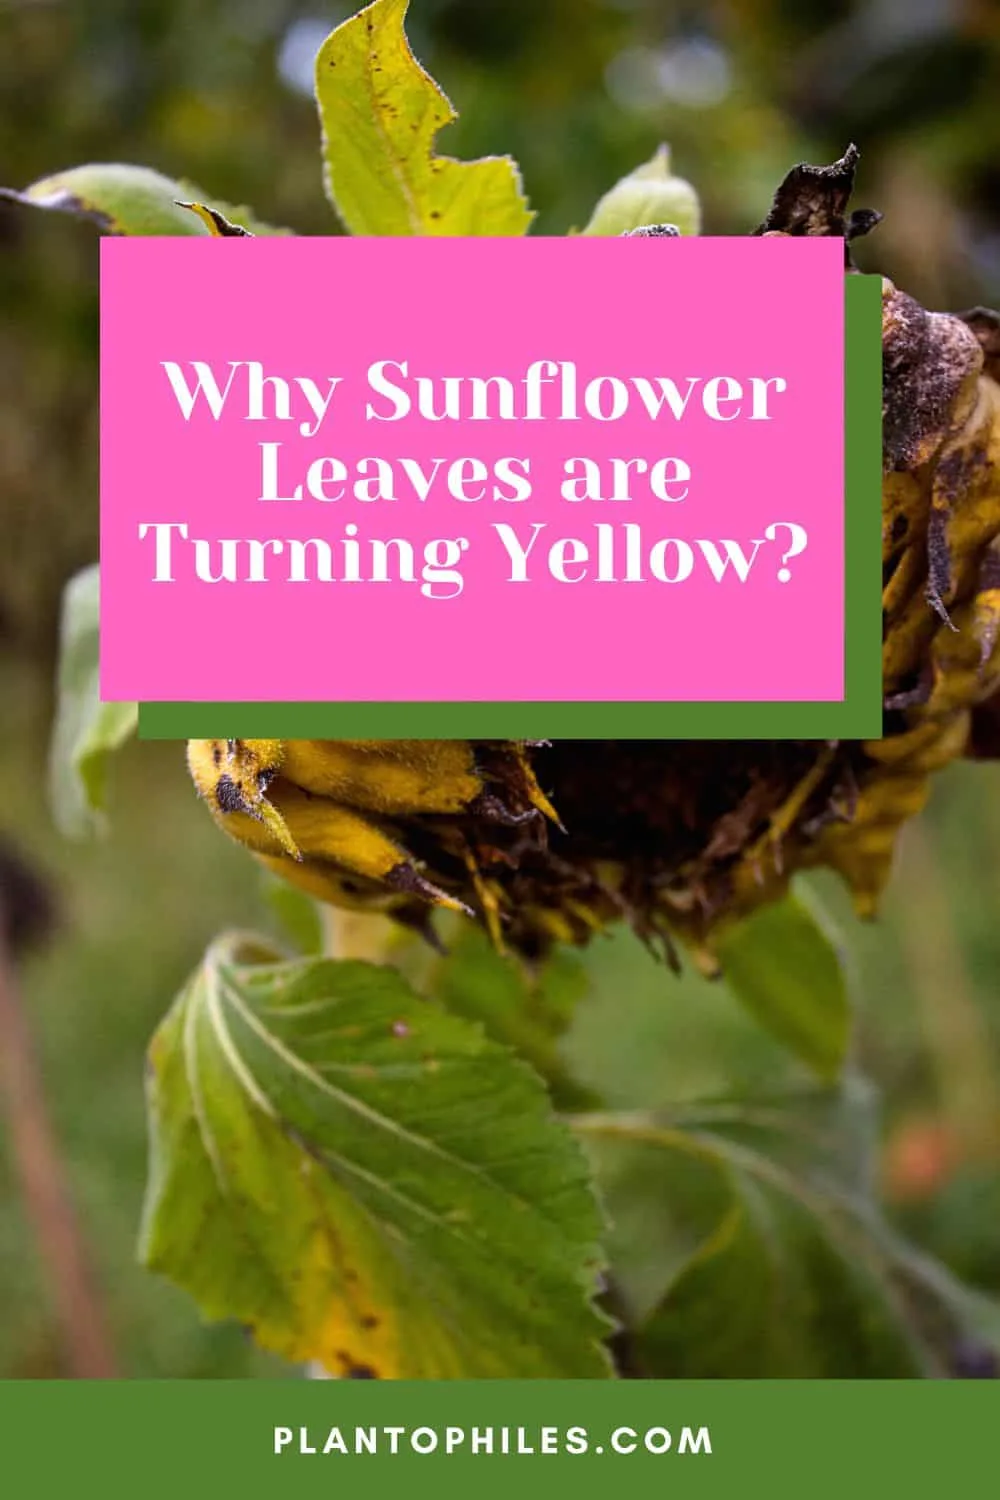 Why Sunflower Leaves Are Turning Yellow?